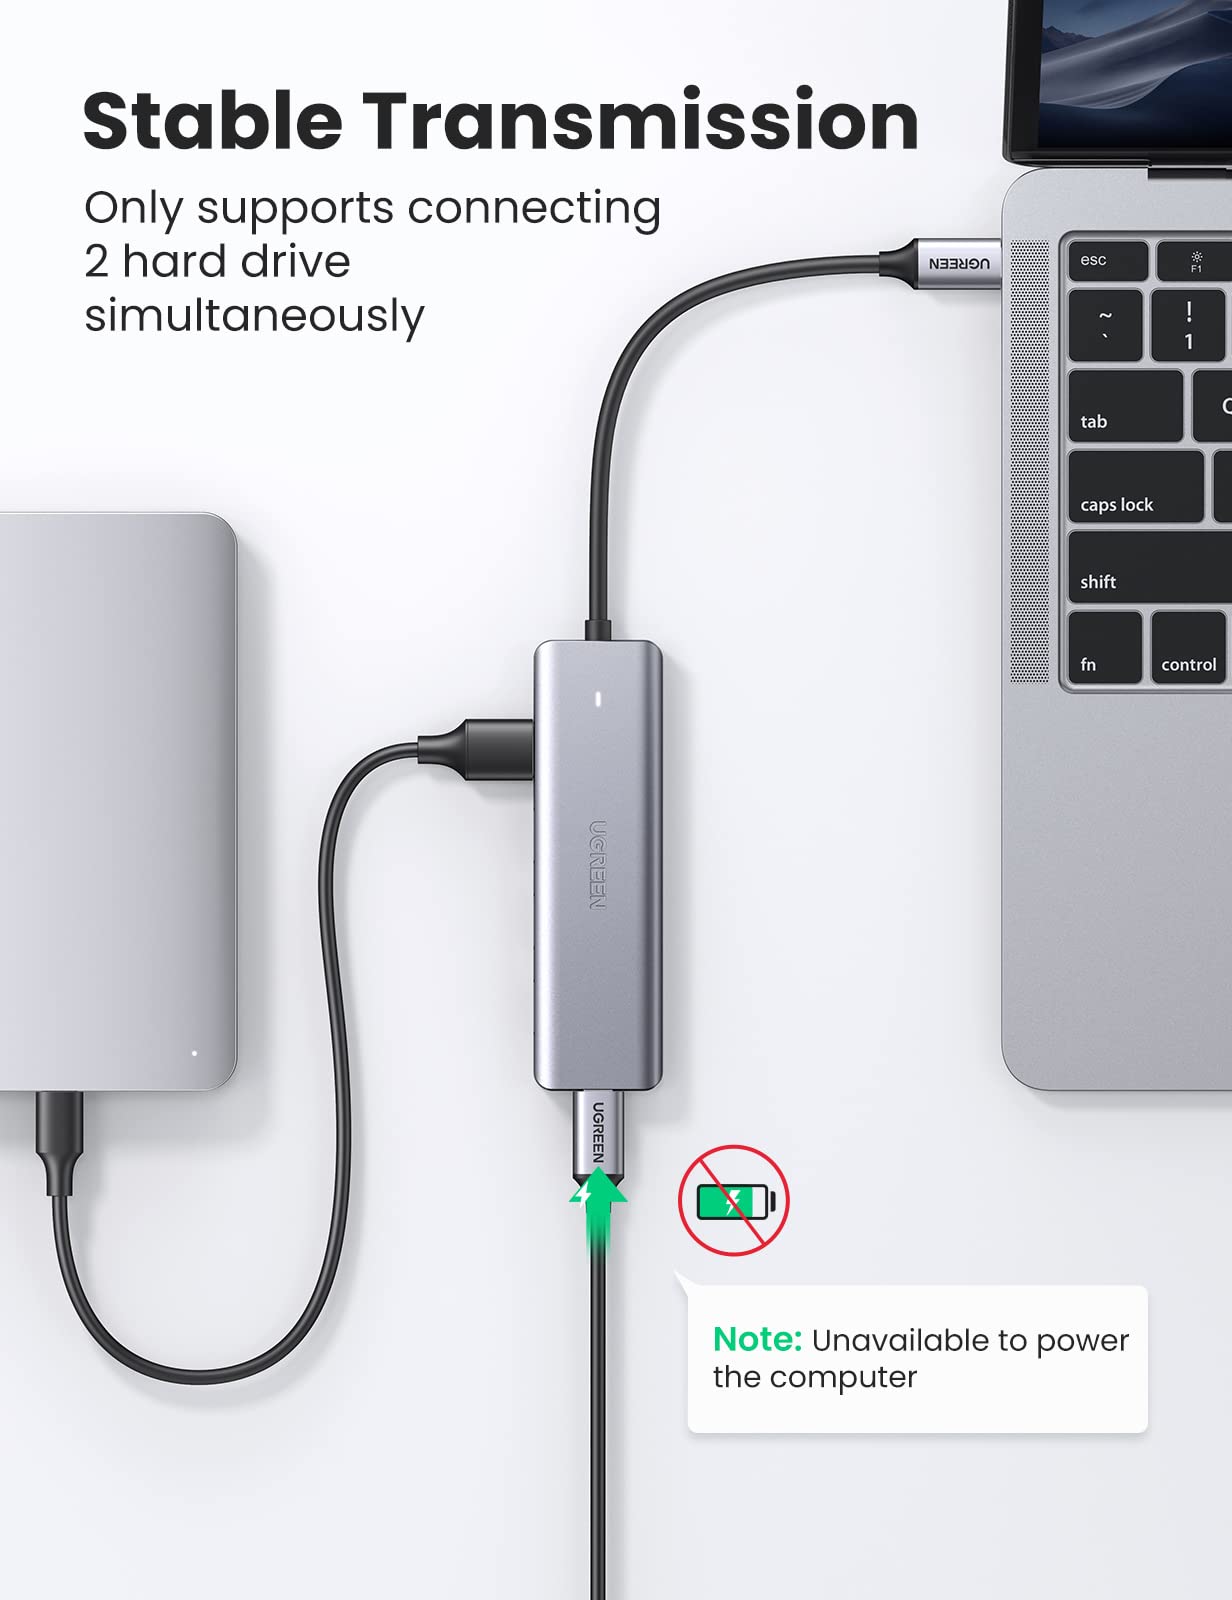 UGREEN USB C Hub Slim Type C to 4 Port USB 3.0 Adapter High-Speed USB Splitter Compatible with Thunderbolt 3 Macbook Pro iPad Pro Air XPS HP Envy Galaxy S22 and More